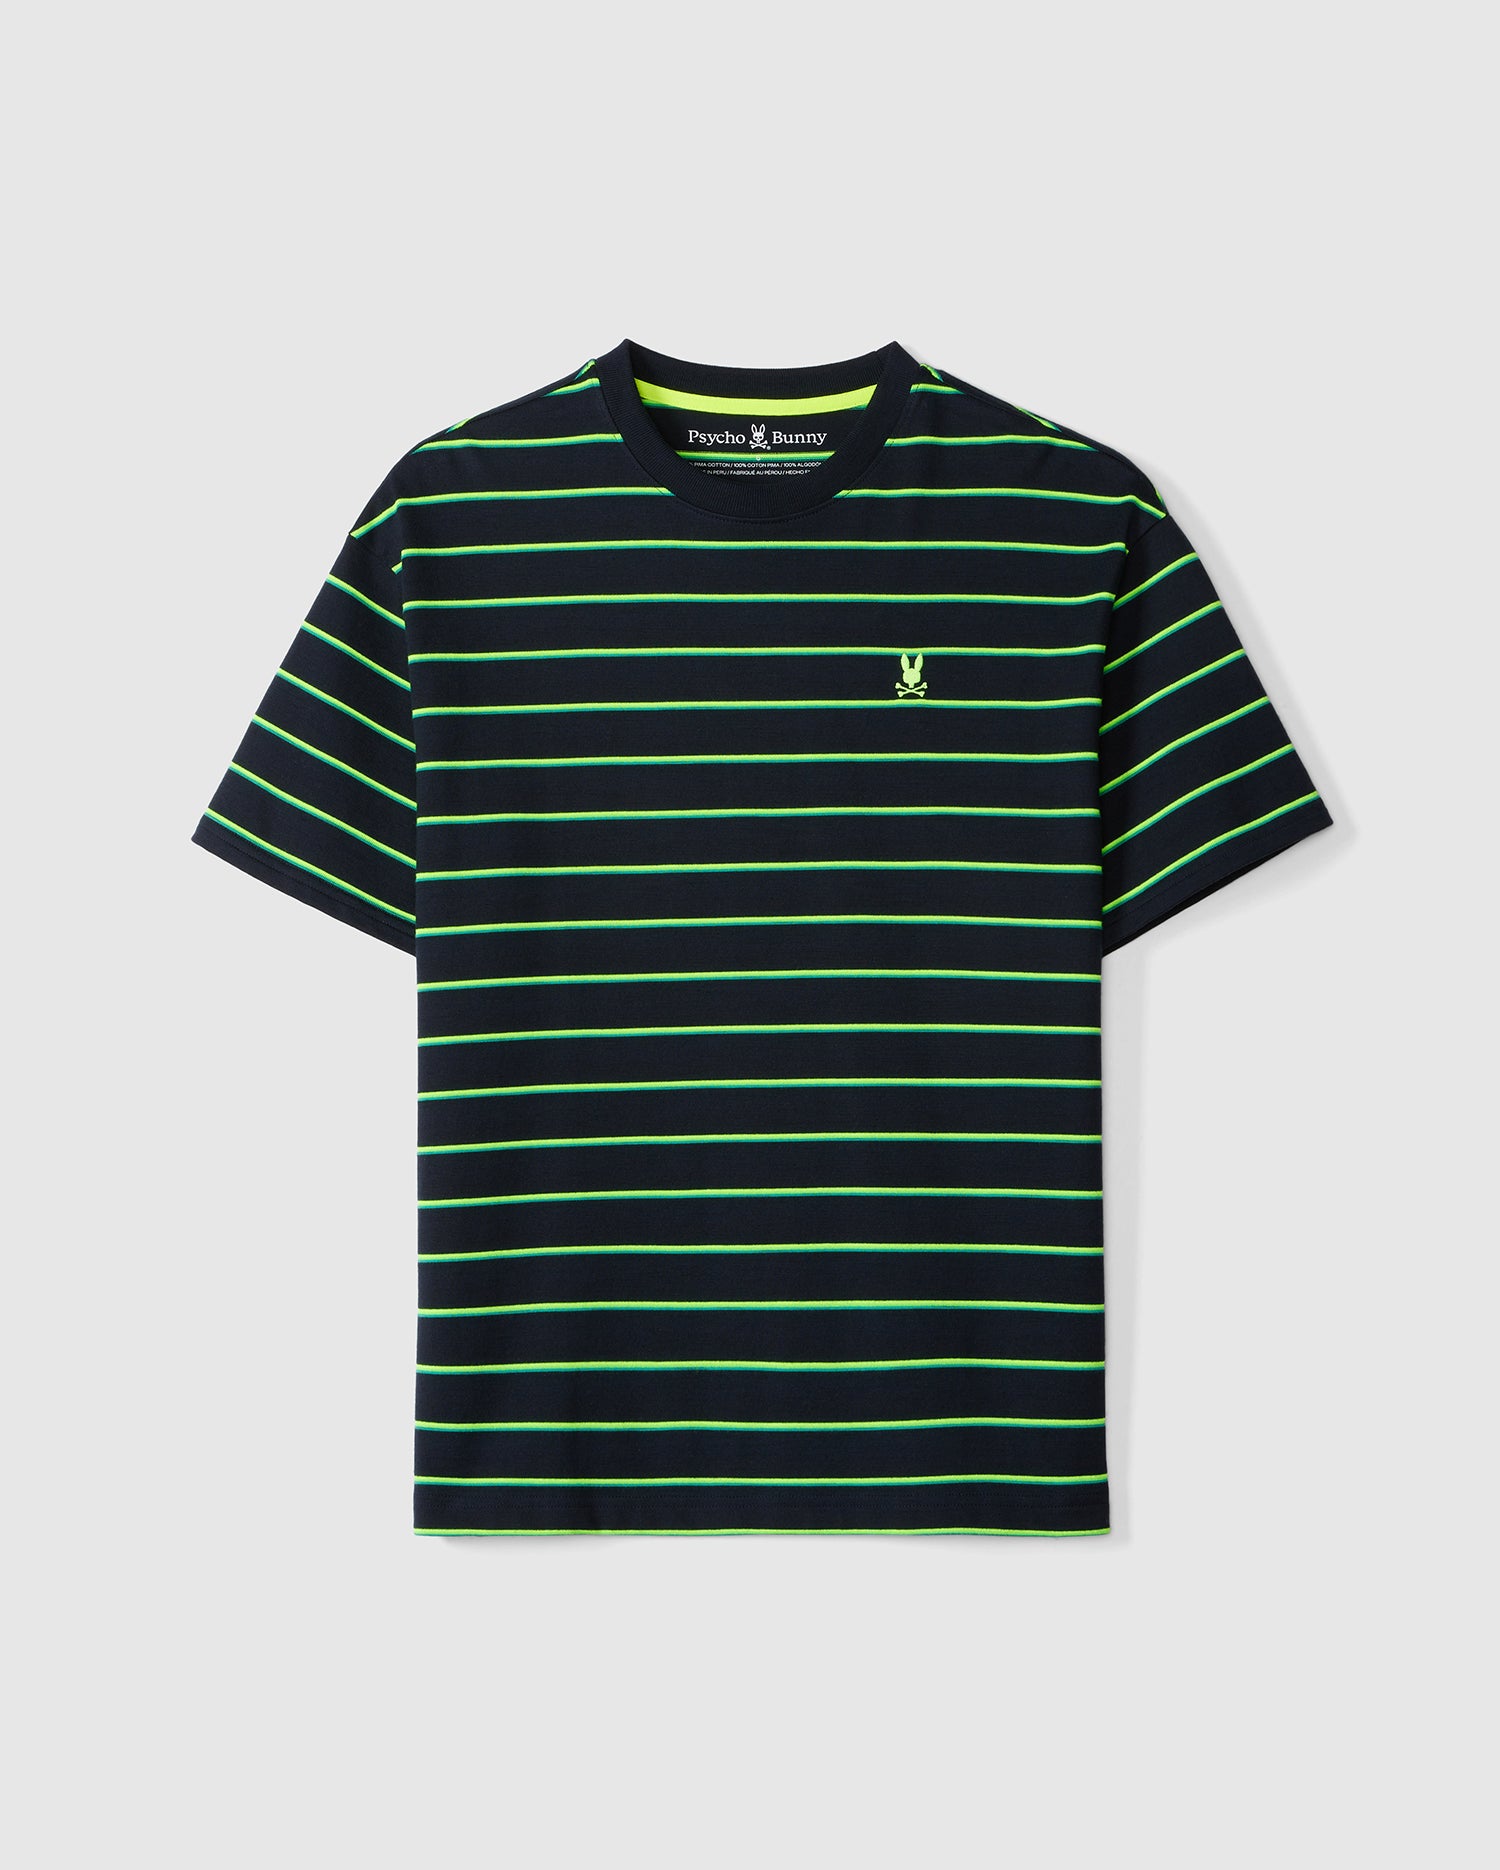 A black T-shirt with thin, evenly spaced 90s-inspired two-tone green stripes. It features a small logo of a stitched rabbit on the left side of the chest. The neckline is round and the shirt has short sleeves, offering a relaxed fit in heavyweight jersey fabric. This is the Psycho Bunny MENS ALTON STRIPE OVERSIZED TEE - B6U409C200.